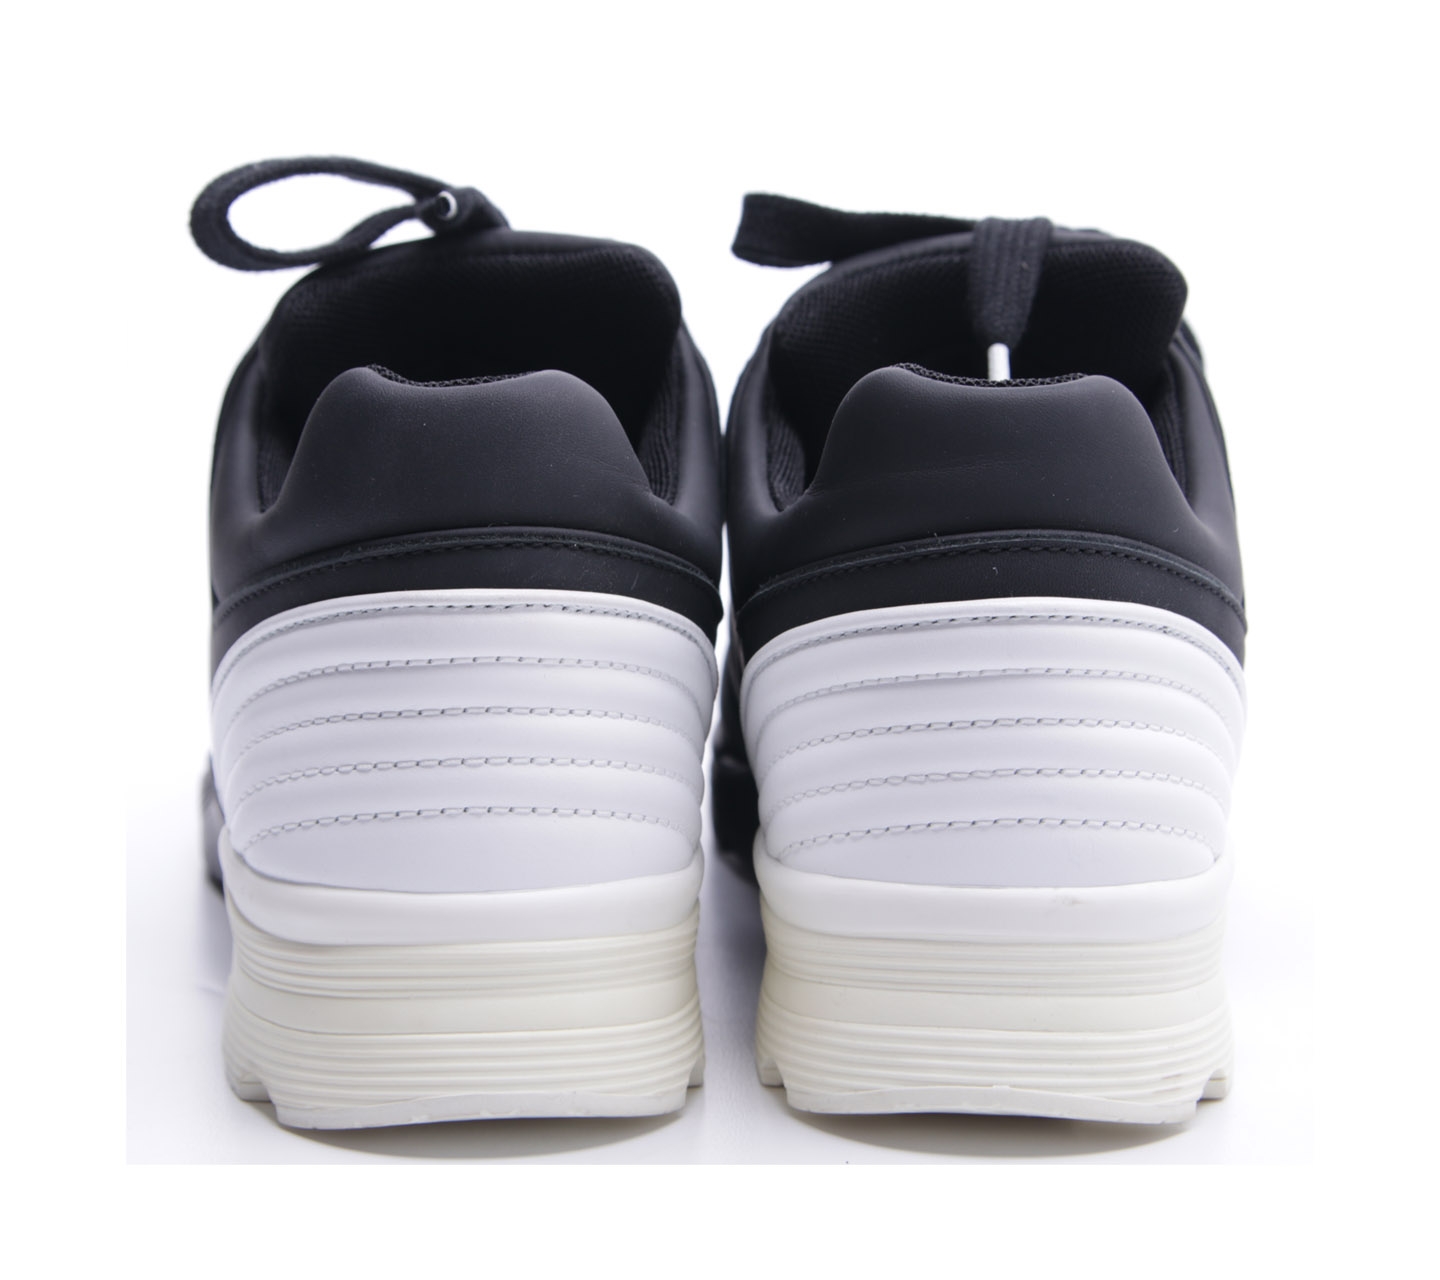 Chanel Black Leather Cc Trainer Tennis Sneakers